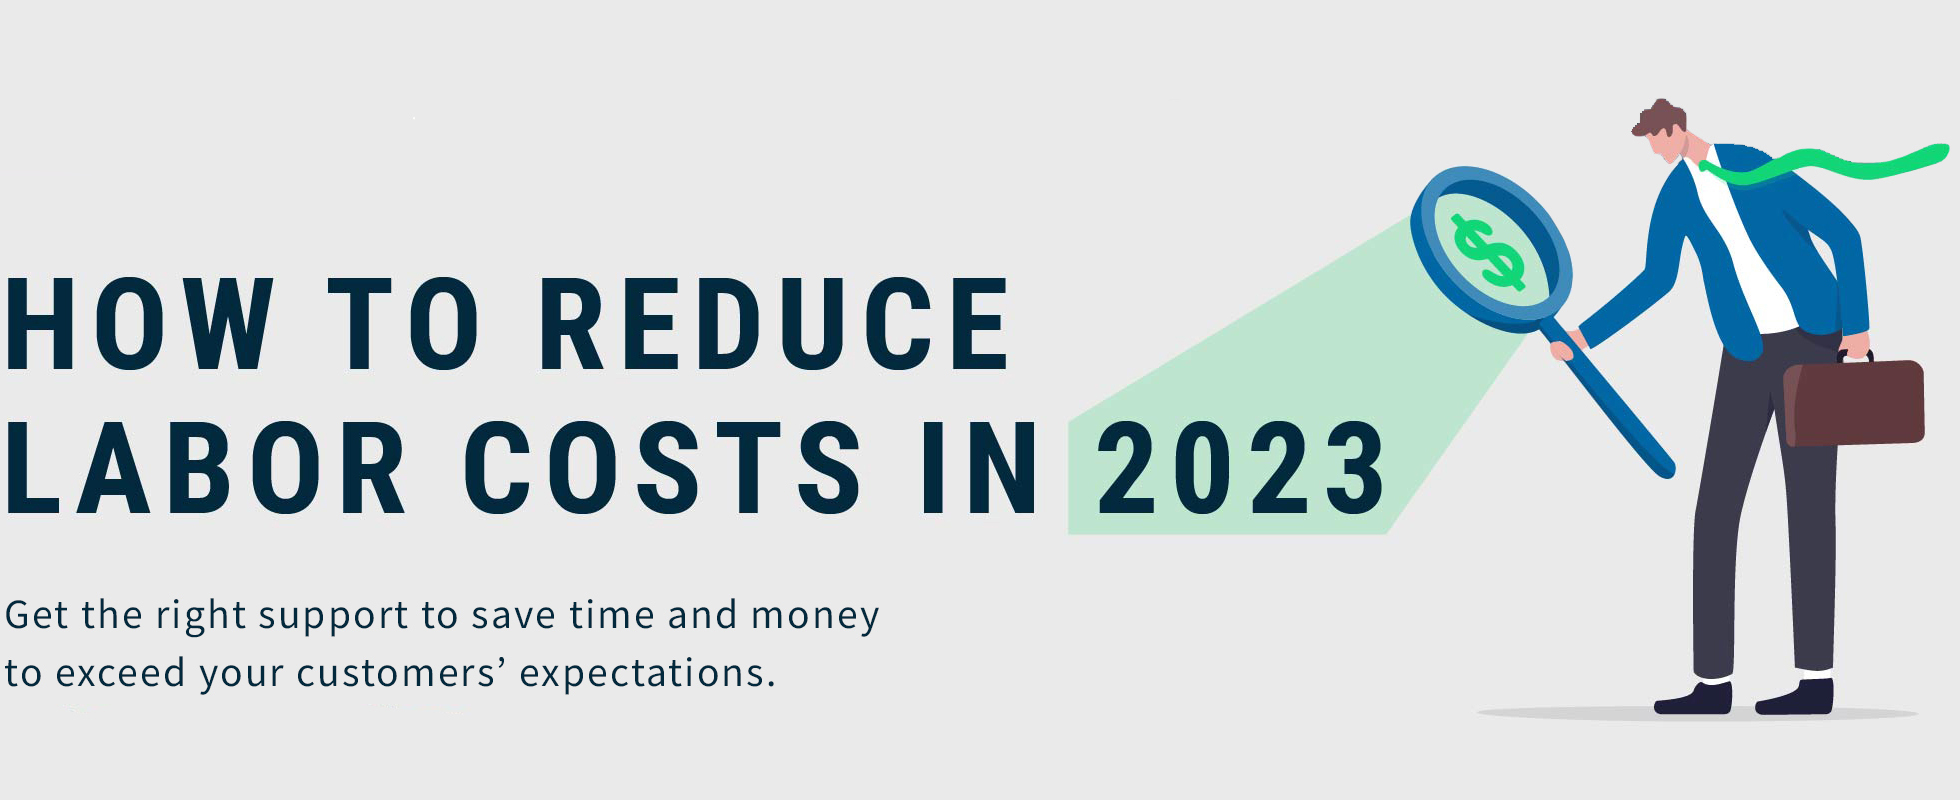 How To Reduce Labor Costs In 2023